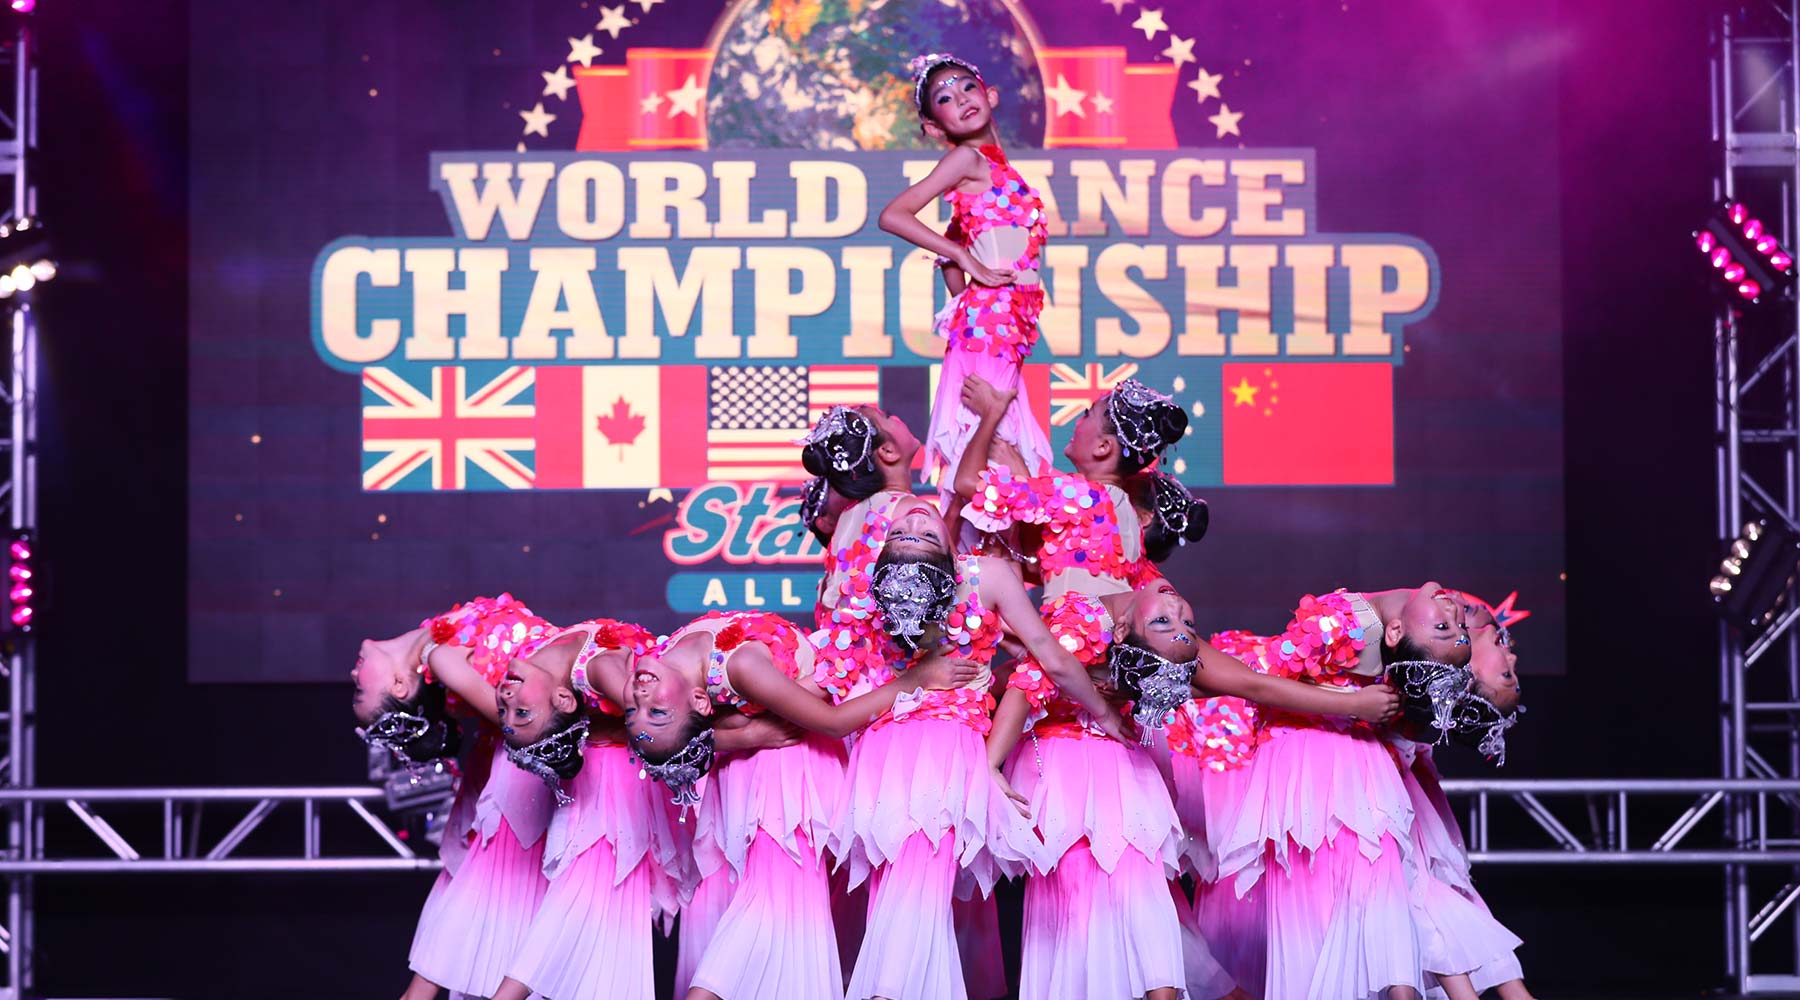 Dance Competitions-When World Dance Championship is in 2020